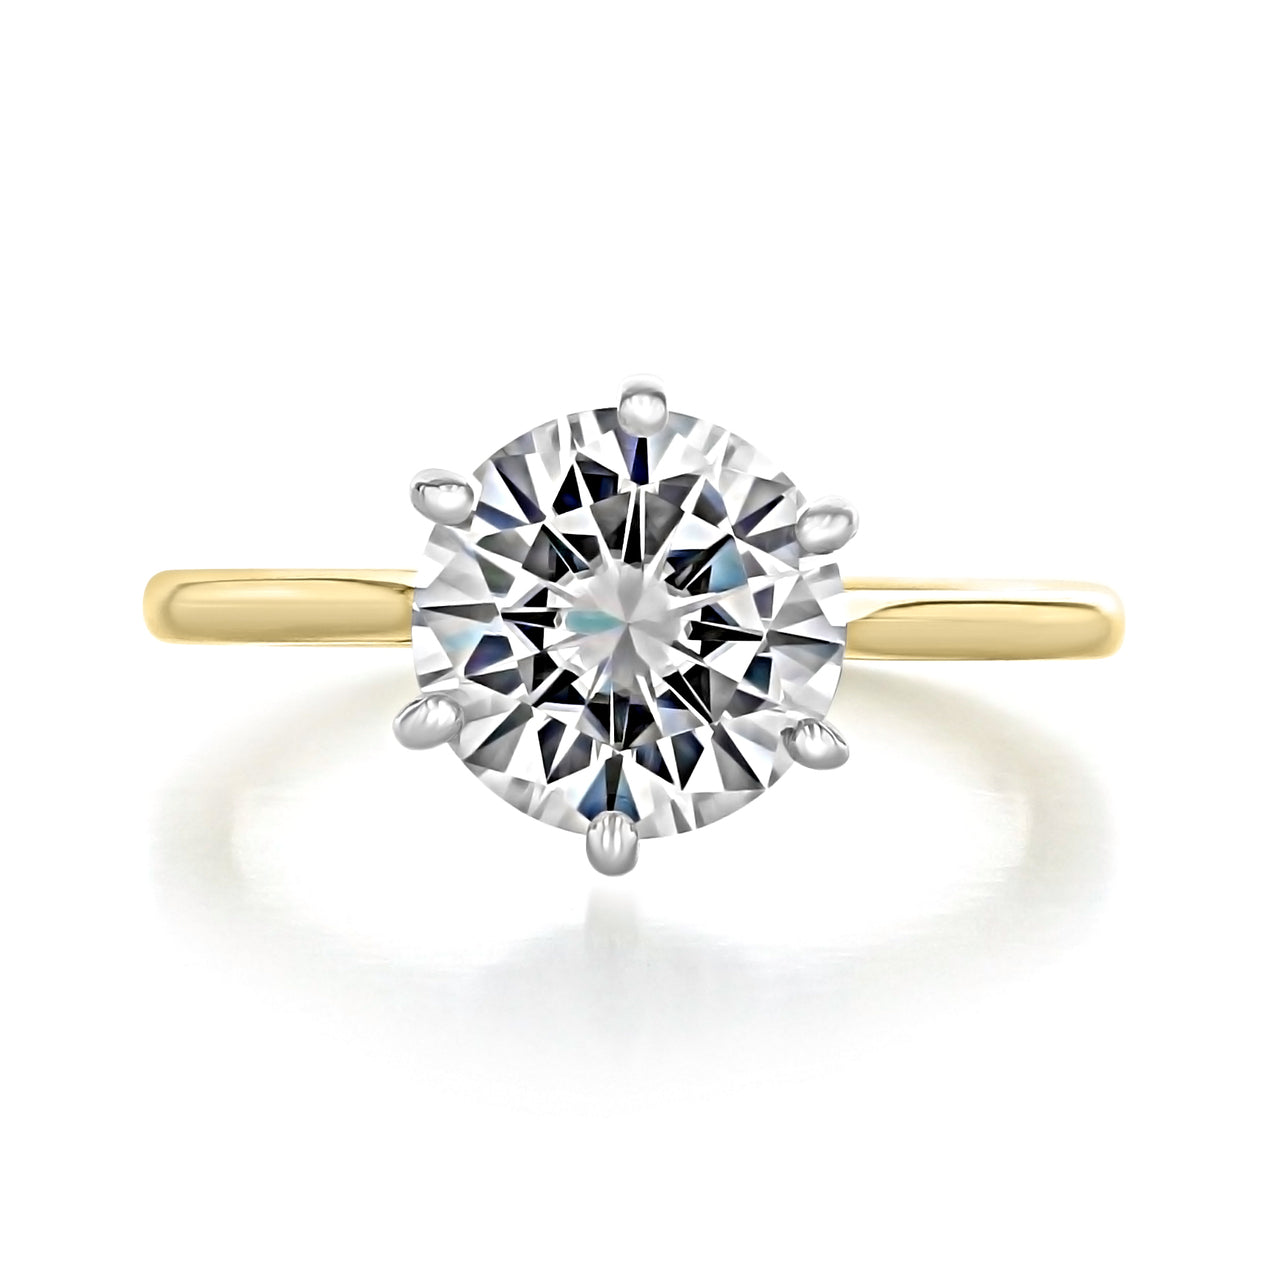 Two-Tone Round Moissanite Engagement Ring in Yellow Gold-Plated 925 Silver